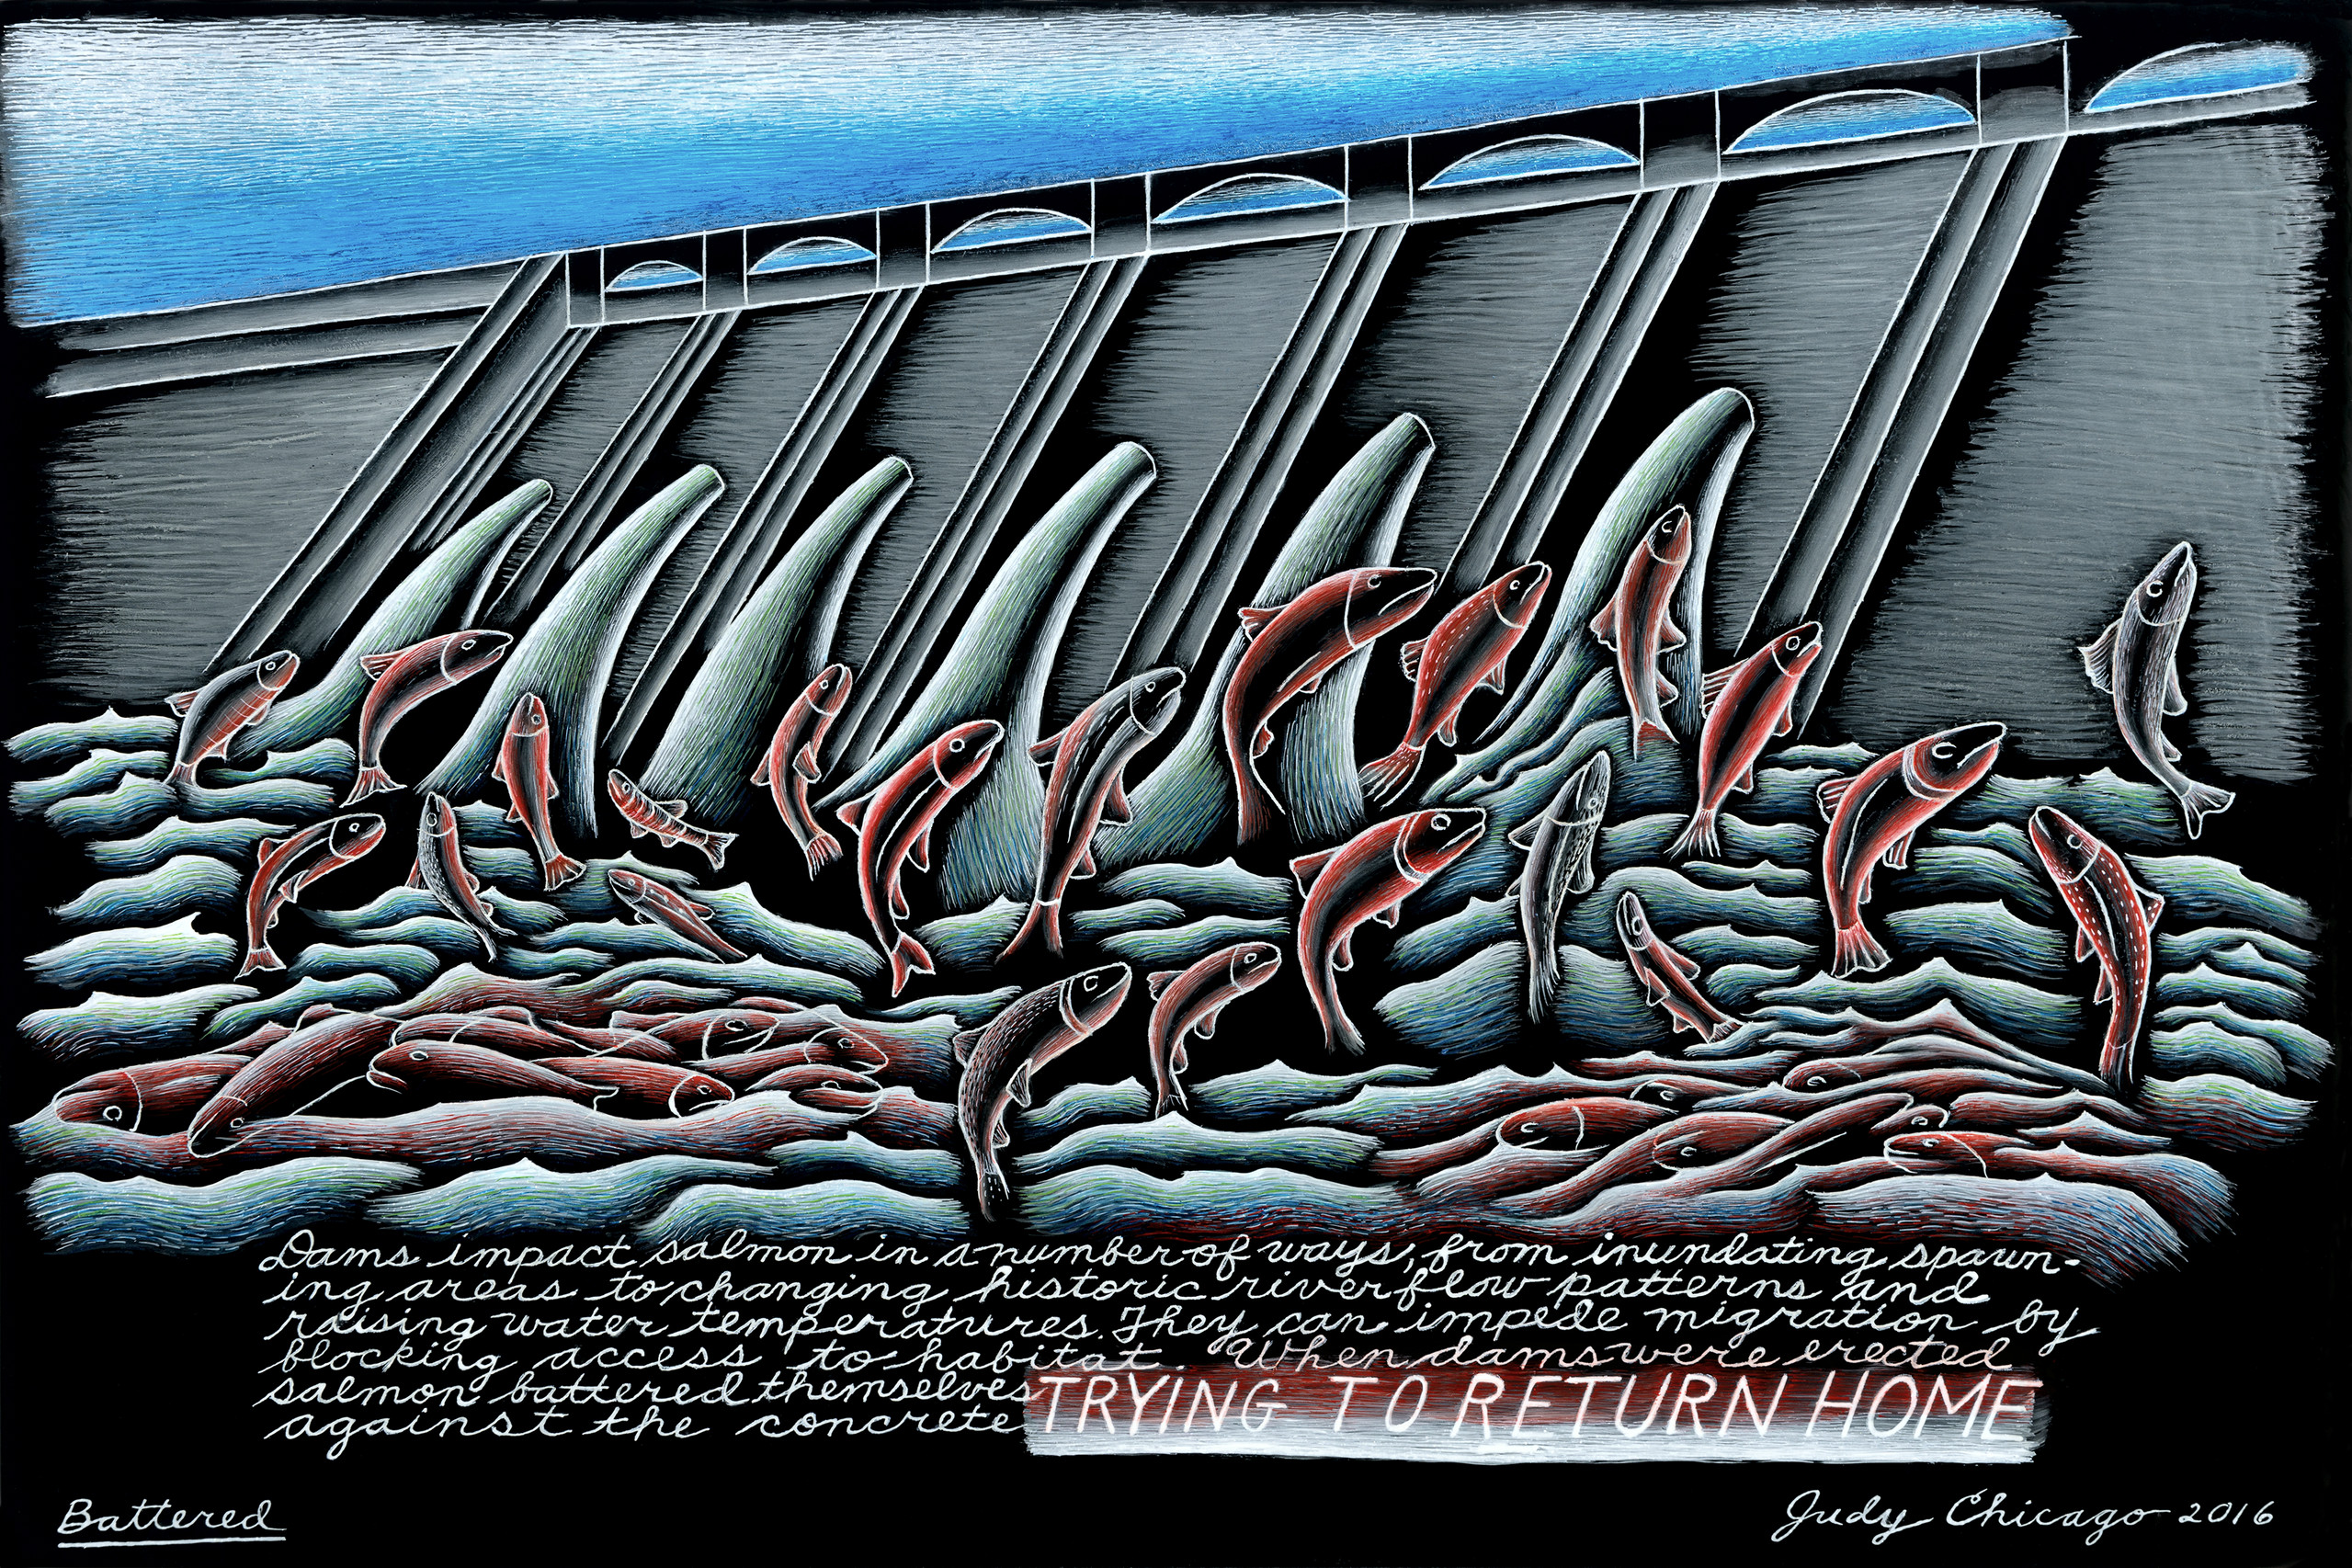 Painted black glass with a scene of salmon being blocked from swimming upstream by a large grey dam.